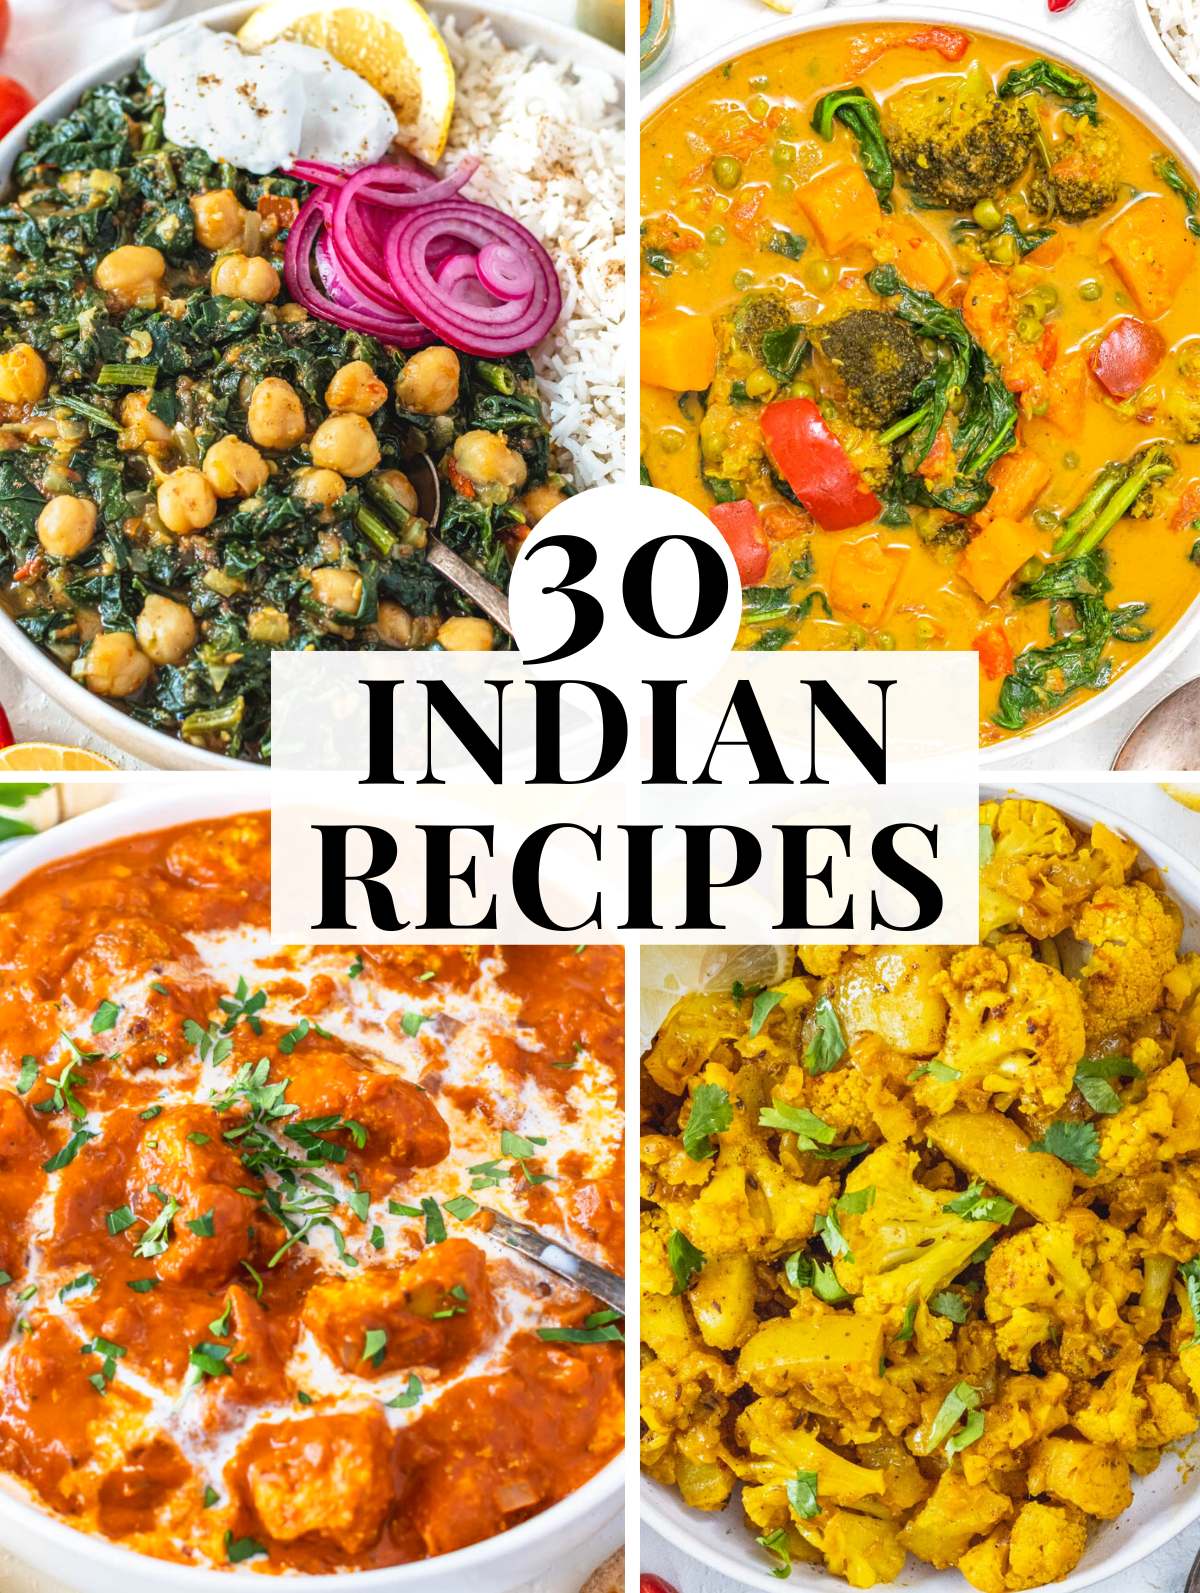 Indian Recipes with curries, rice, and cauliflower dishes